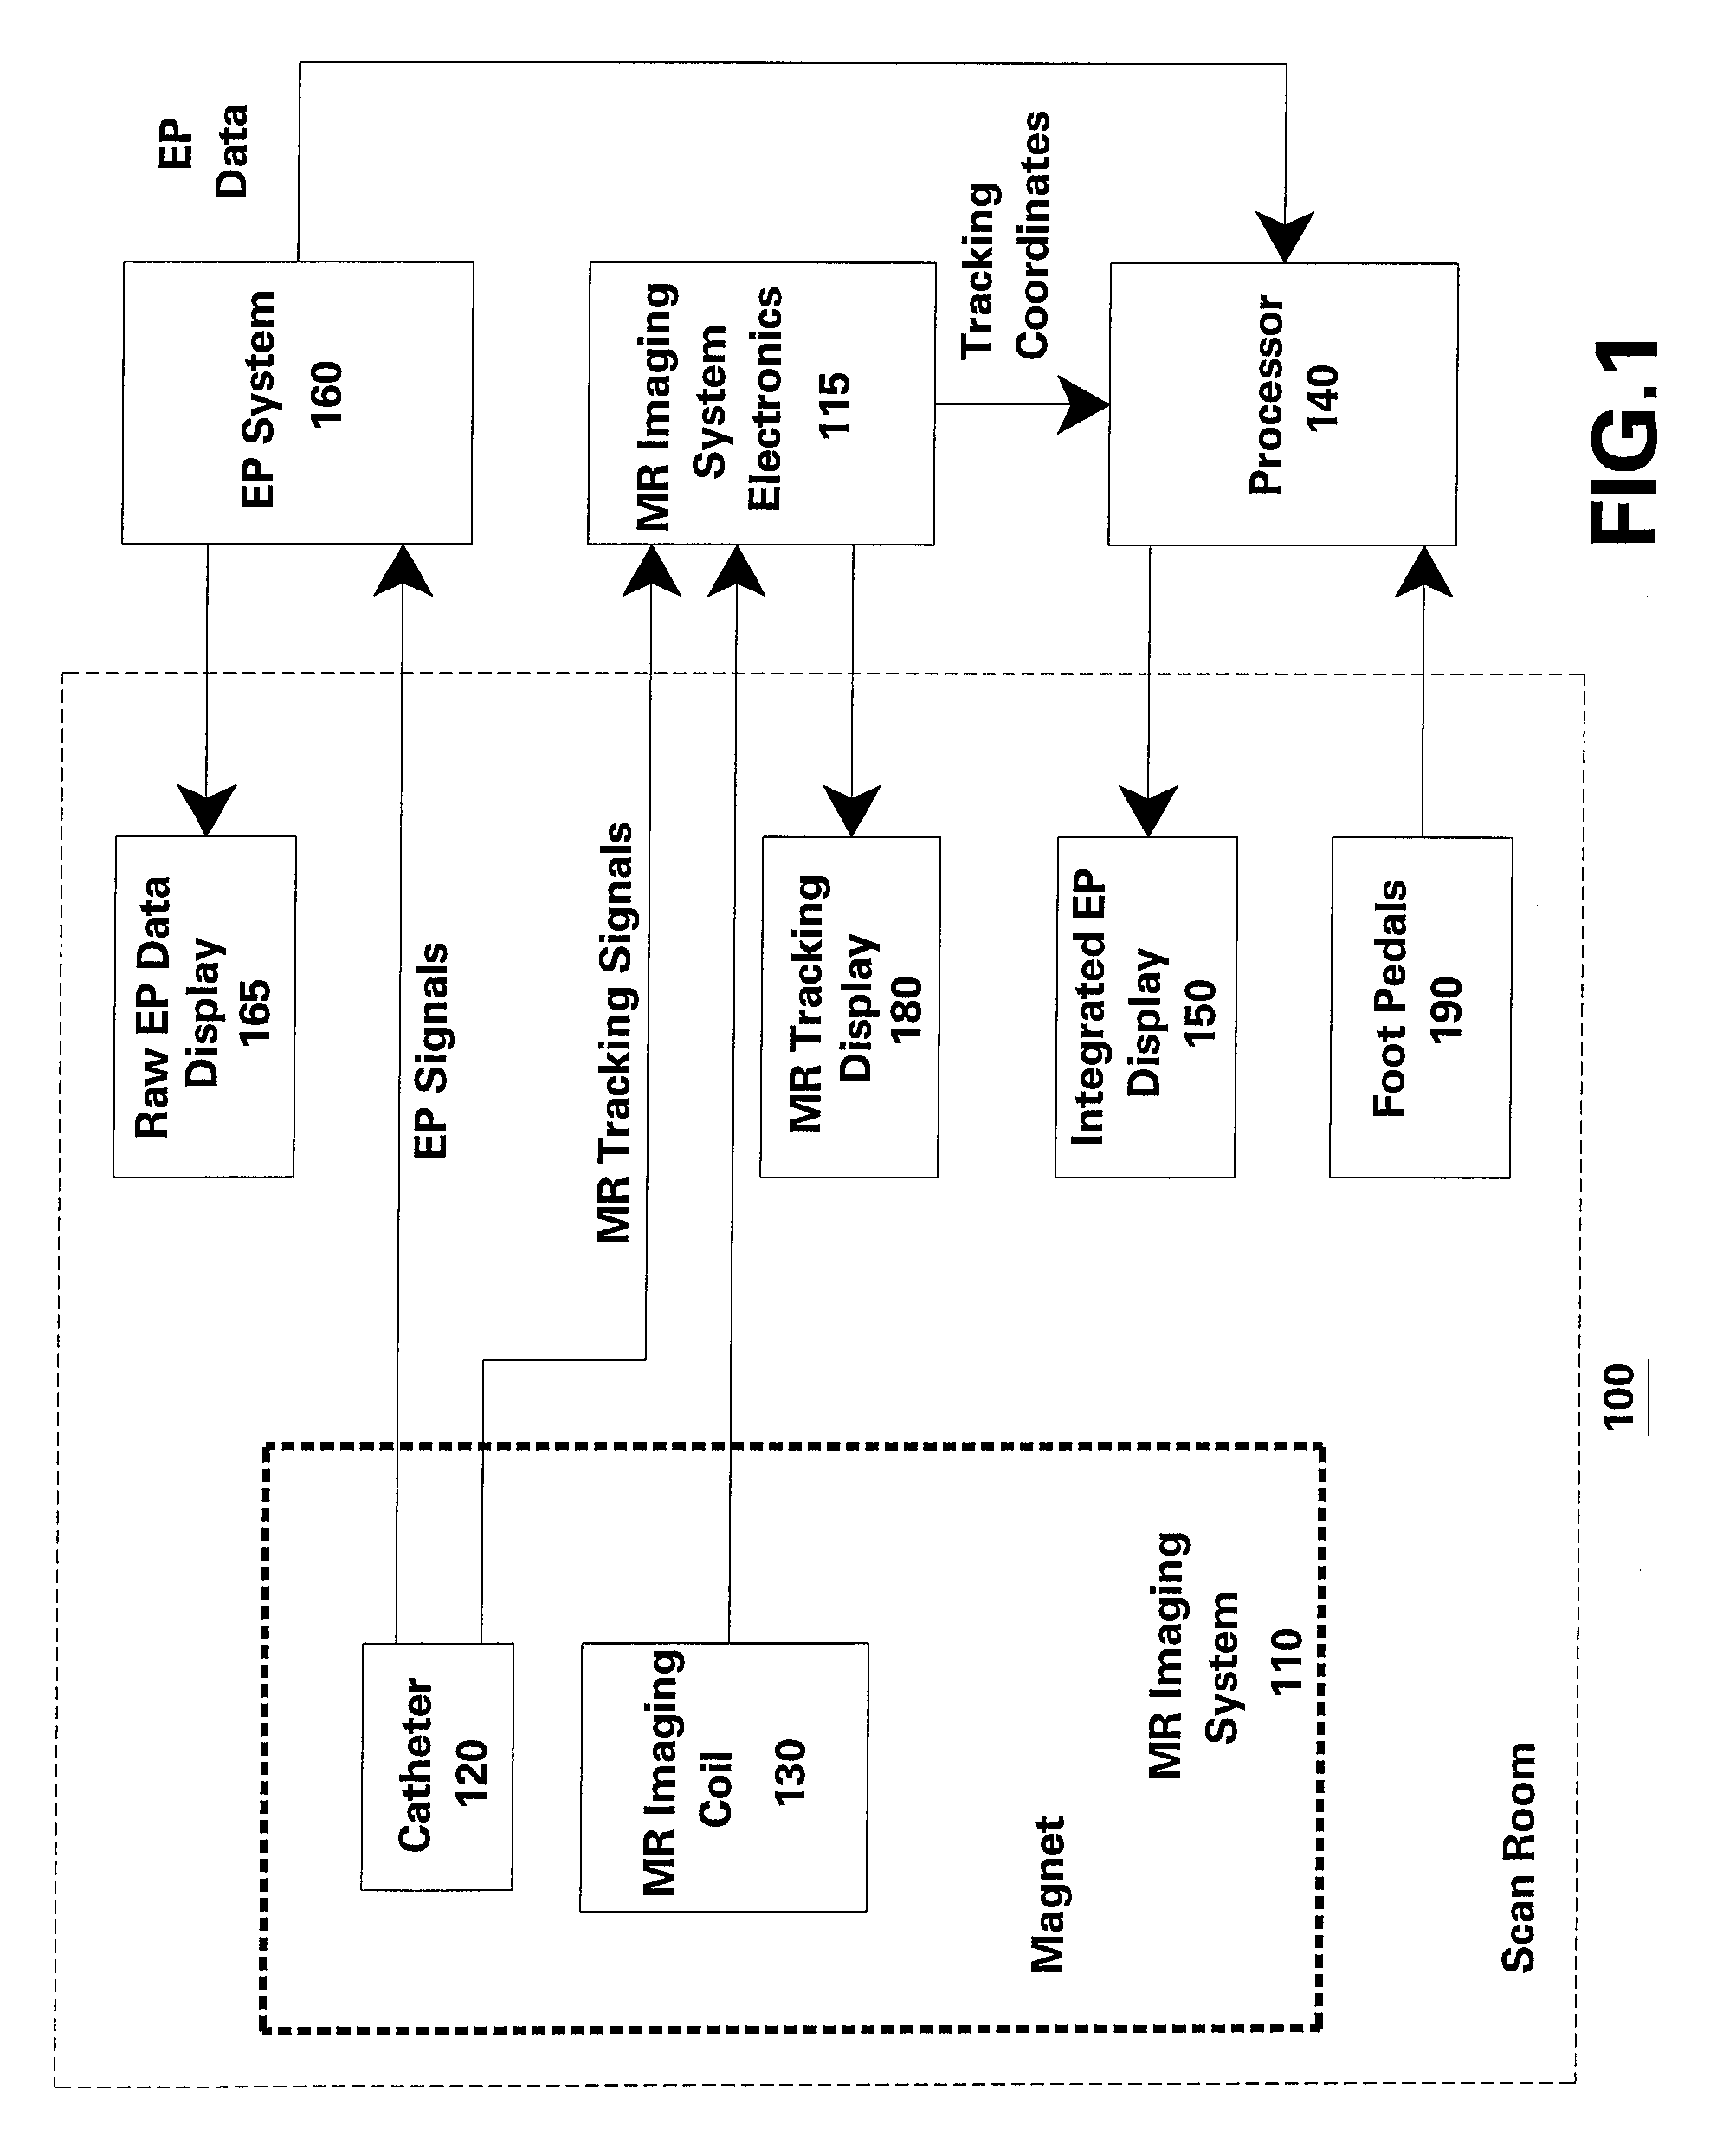 System and method for interventional procedures using MRI